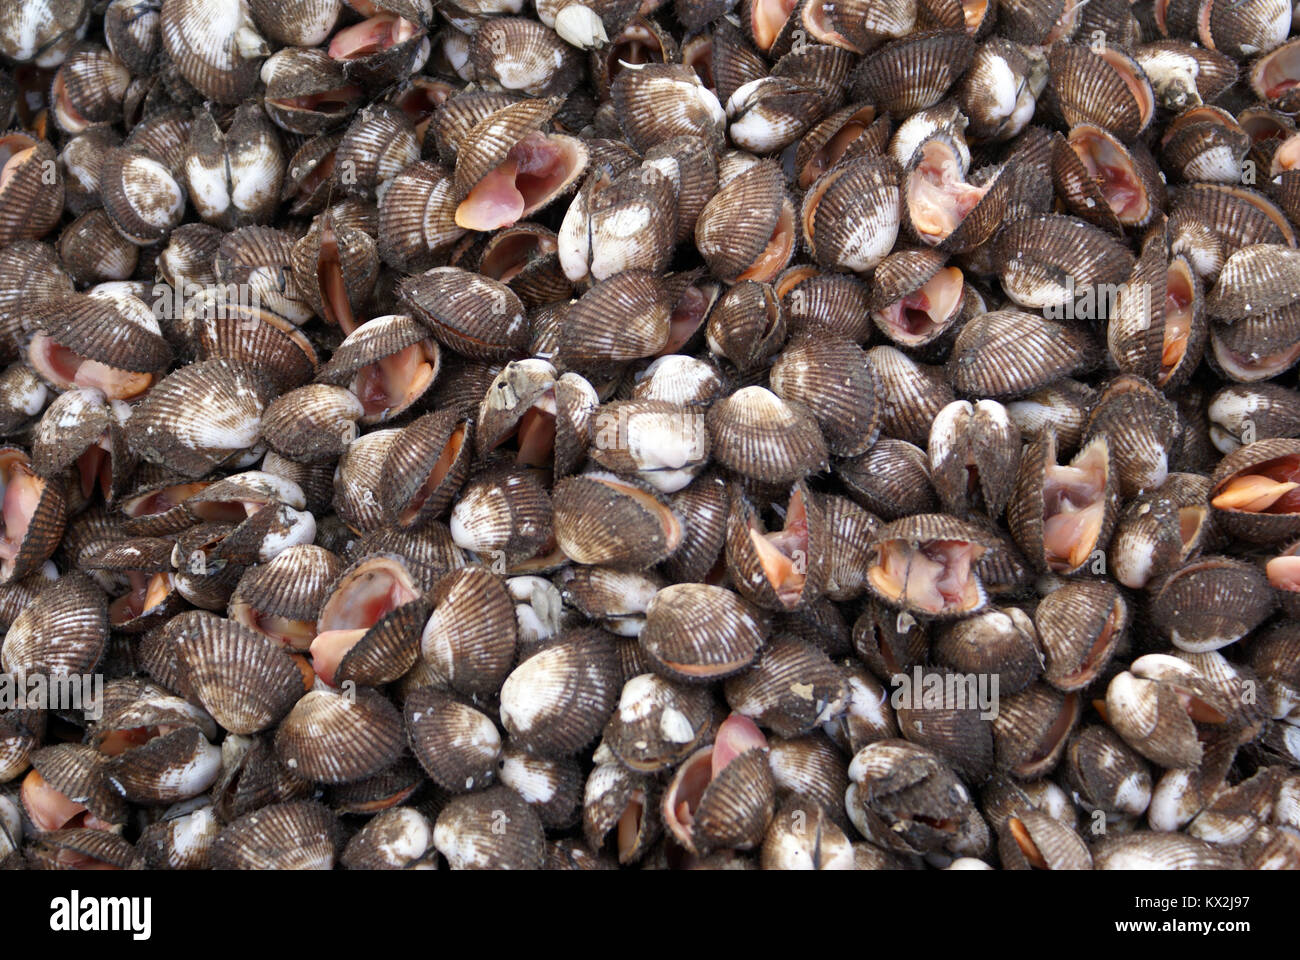 Shells on the stall in the market, Vietnam Stock Photo